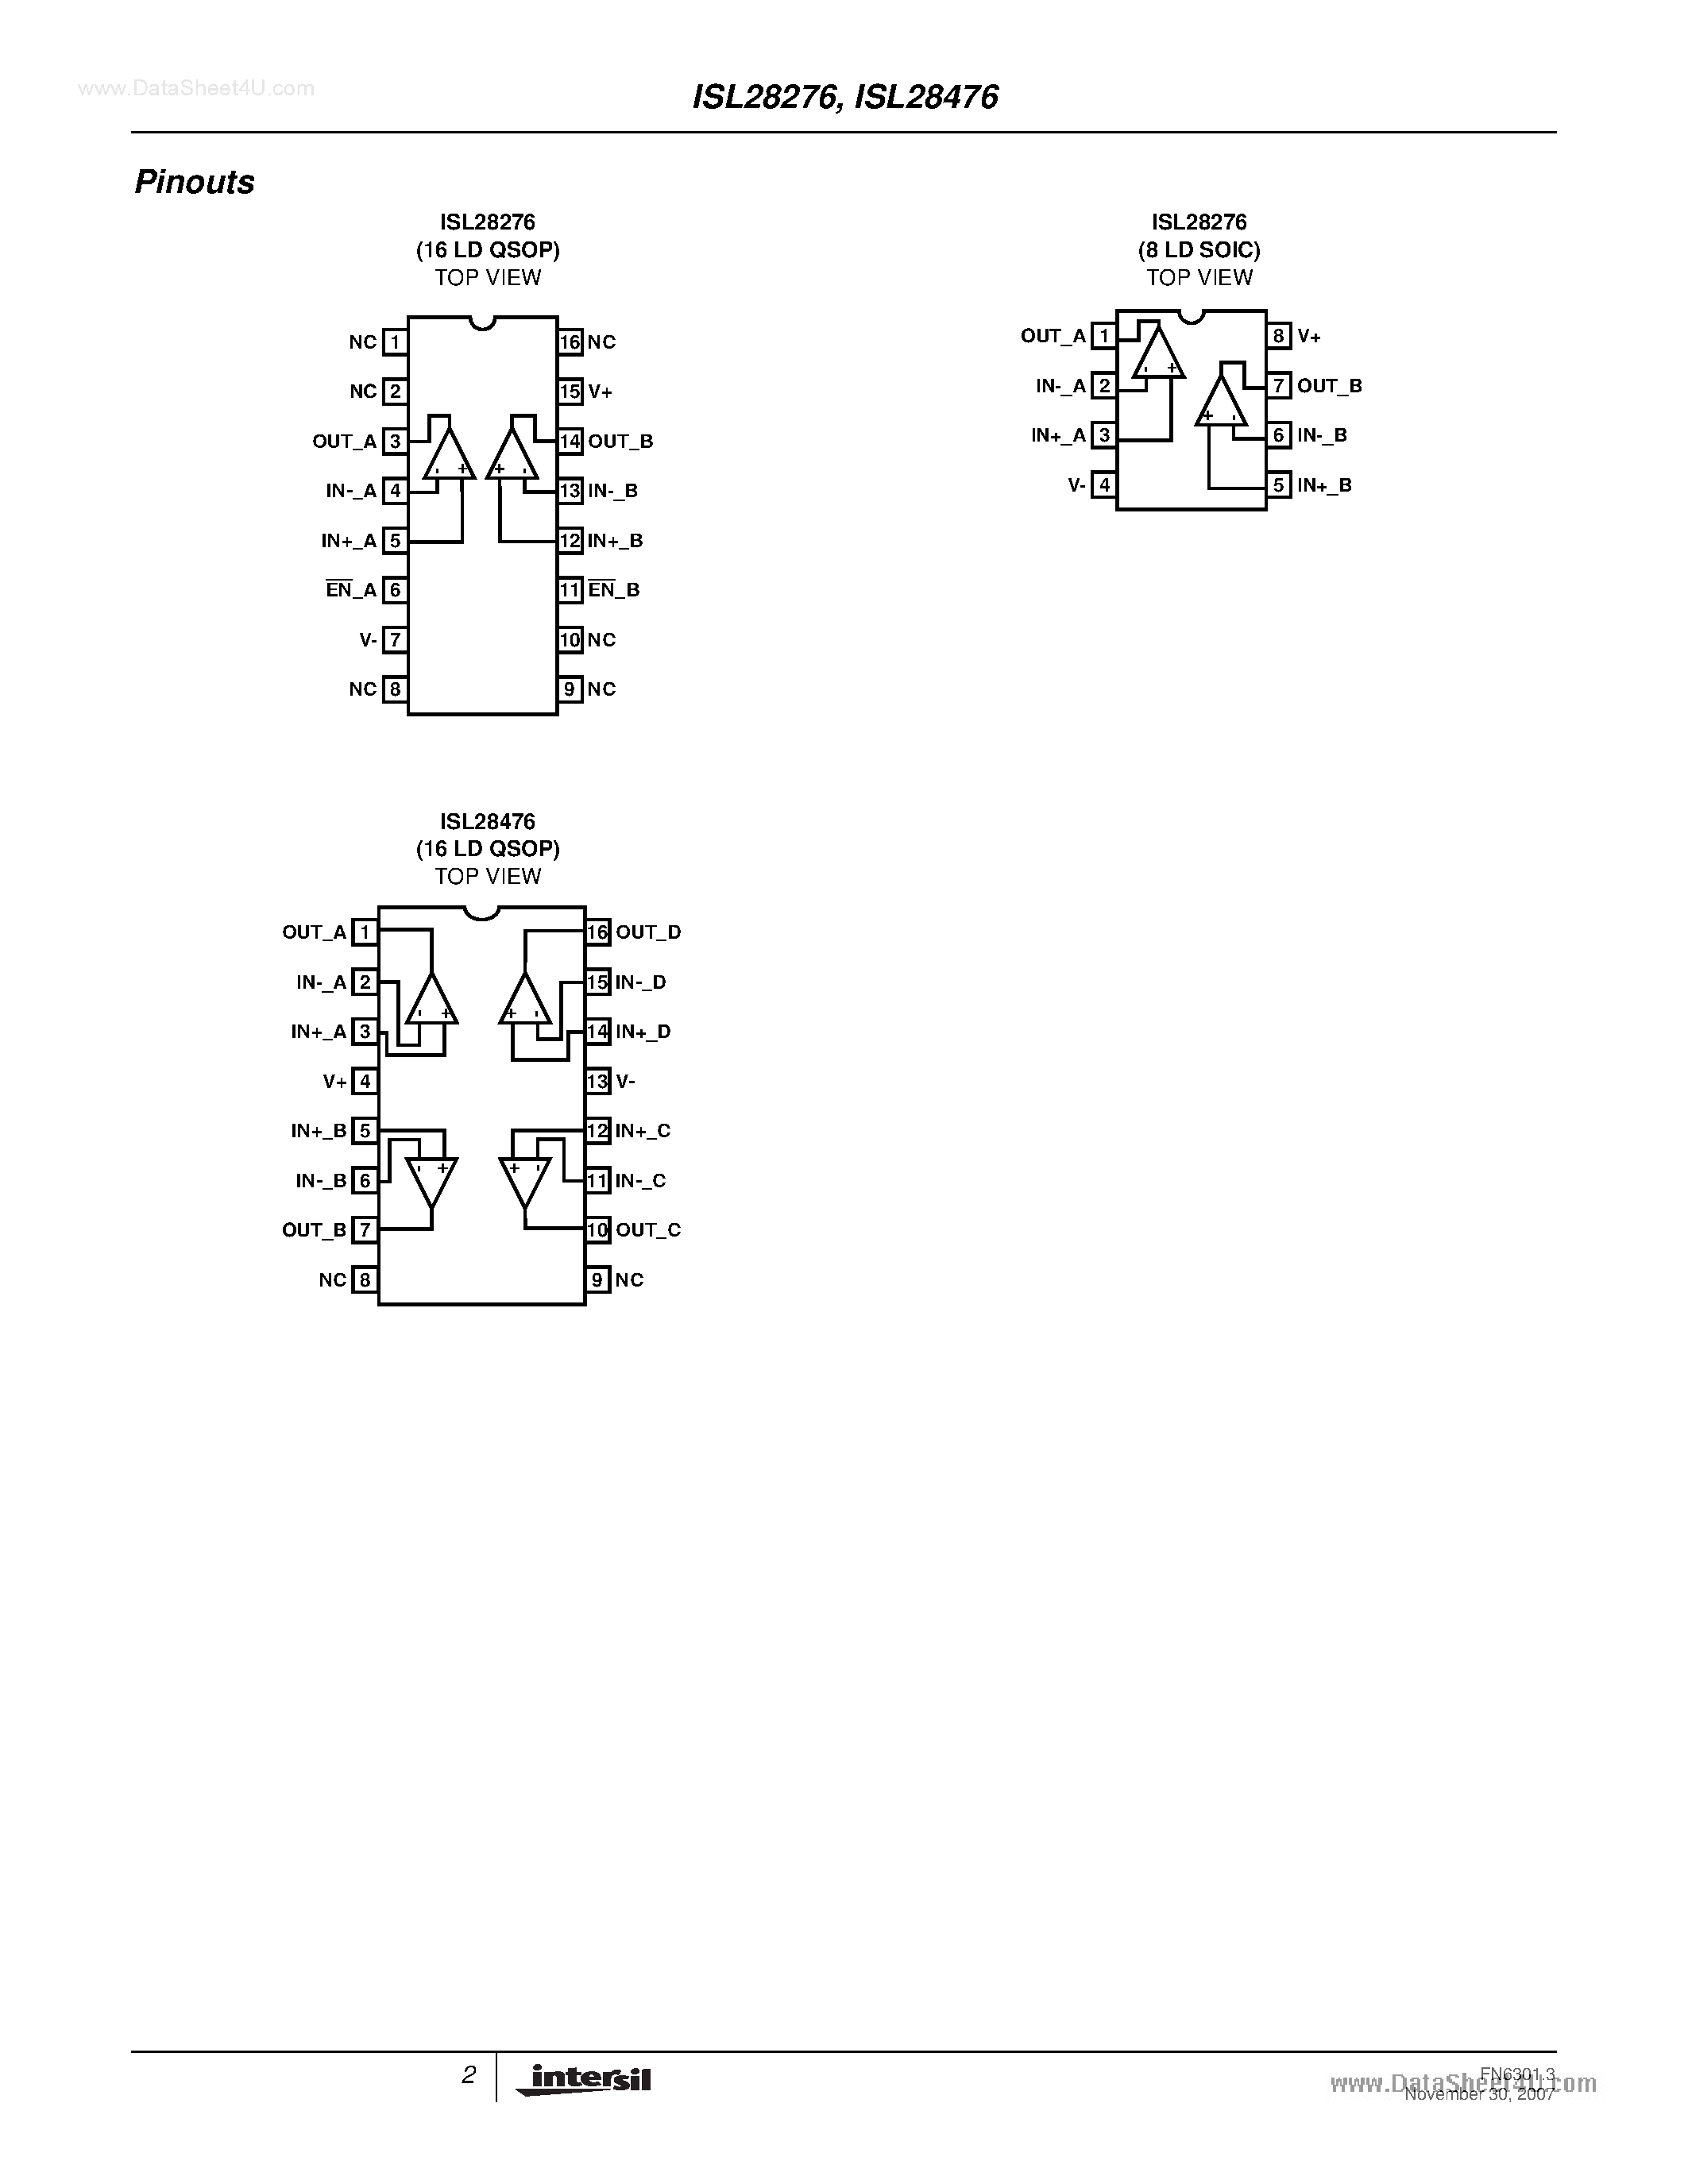 Datasheet ISL28276 - (ISL28276 / ISL28476) Quad Precision Micropower Single Supply Rail-to-Rail Input And Output Precision Op Amps page 2